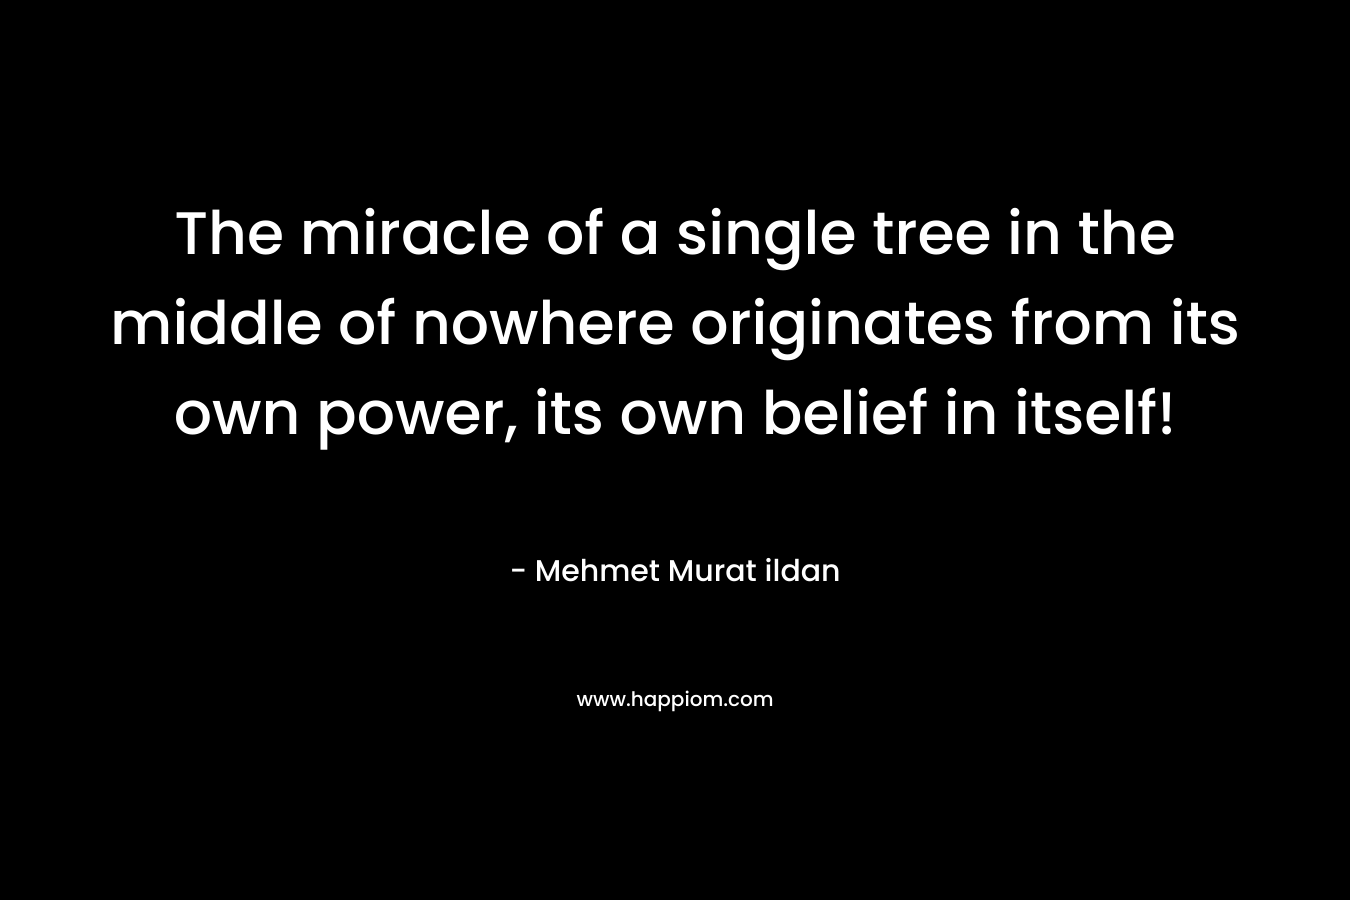 The miracle of a single tree in the middle of nowhere originates from its own power, its own belief in itself!